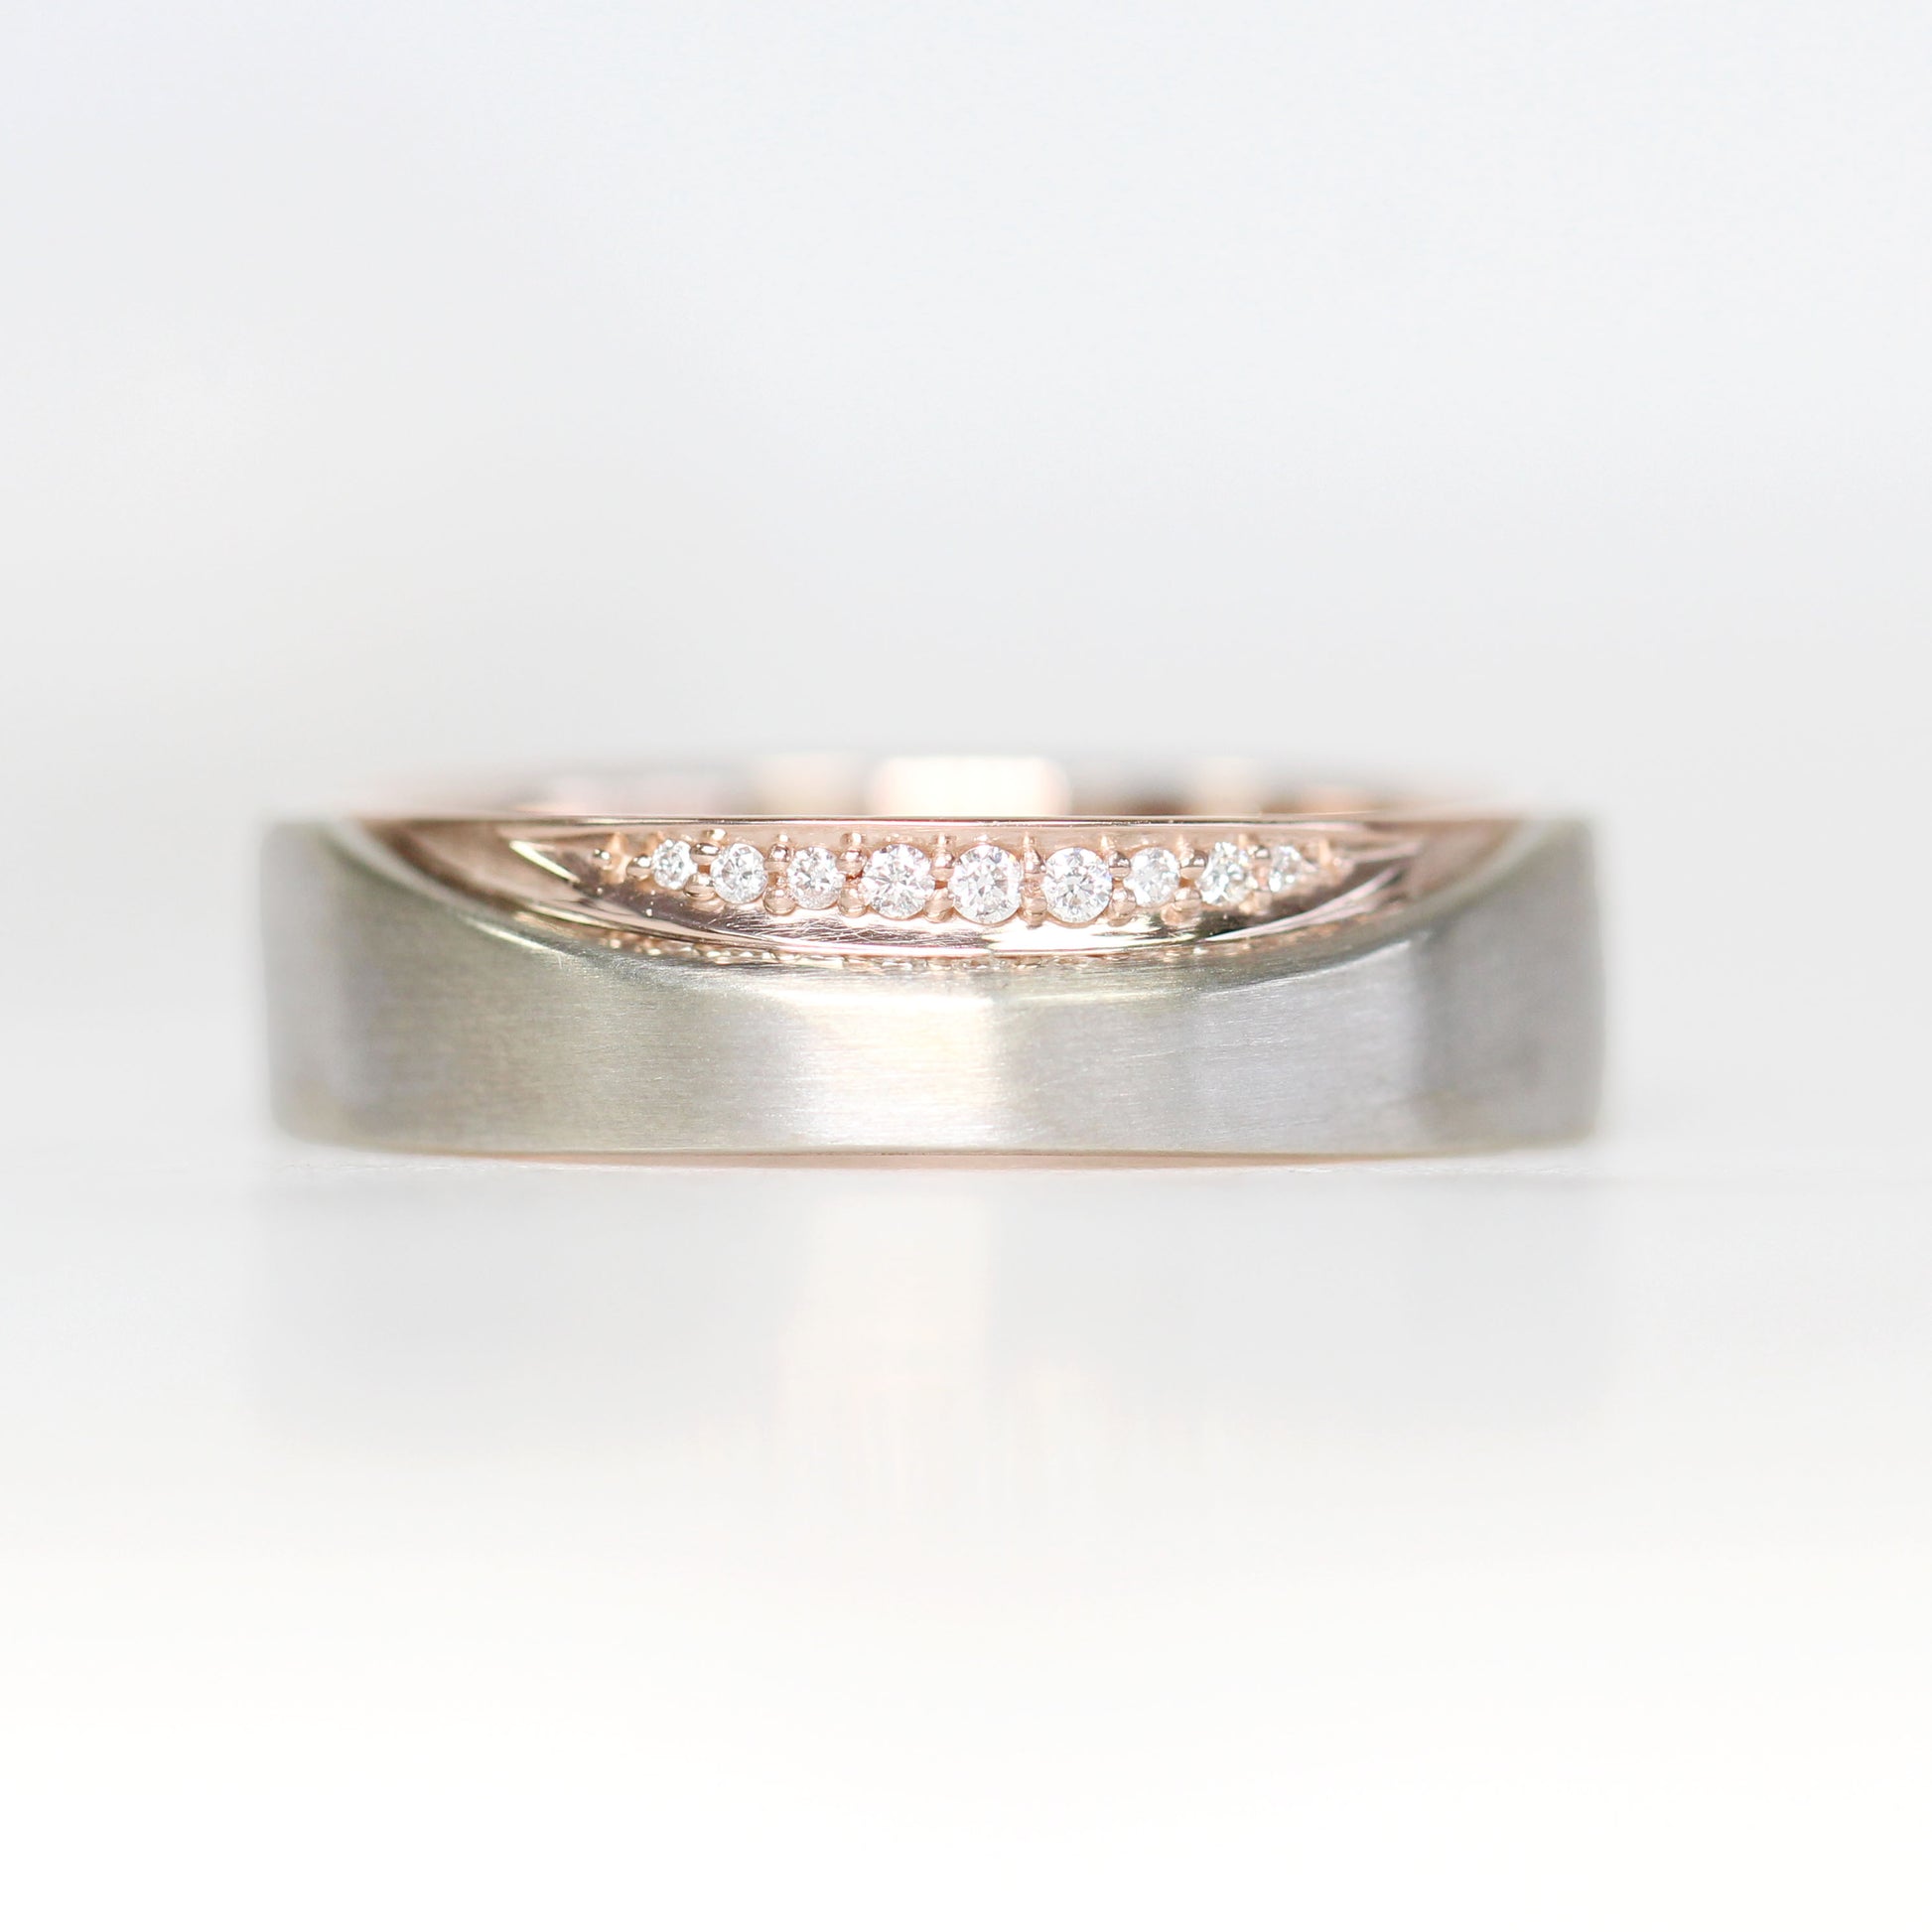 Caelen NAME Two Toned Band with 9 Graduated Diamonds - Made to Order - Midwinter Co. Alternative Bridal Rings and Modern Fine Jewelry